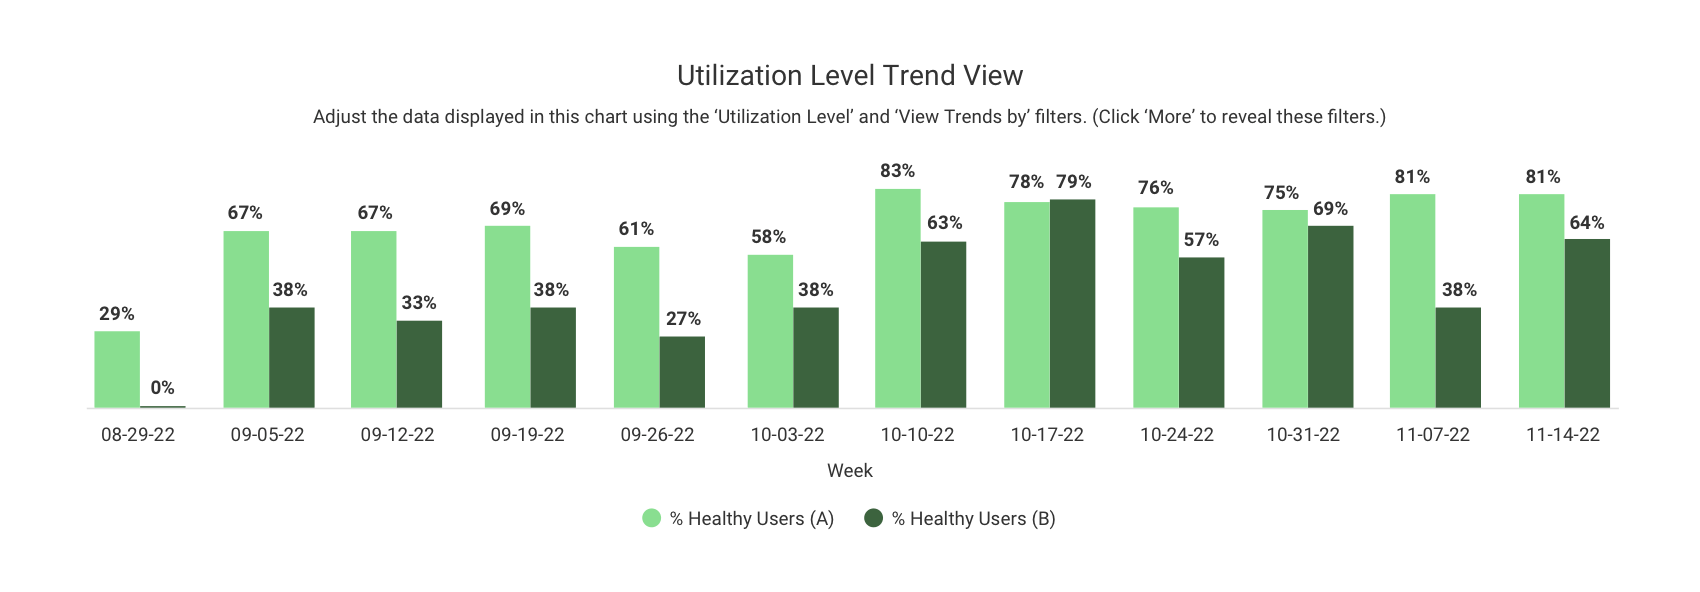 Utilization trends to understand how utilization levels are impacted by employees adjusting their habits from commute times to working from home.